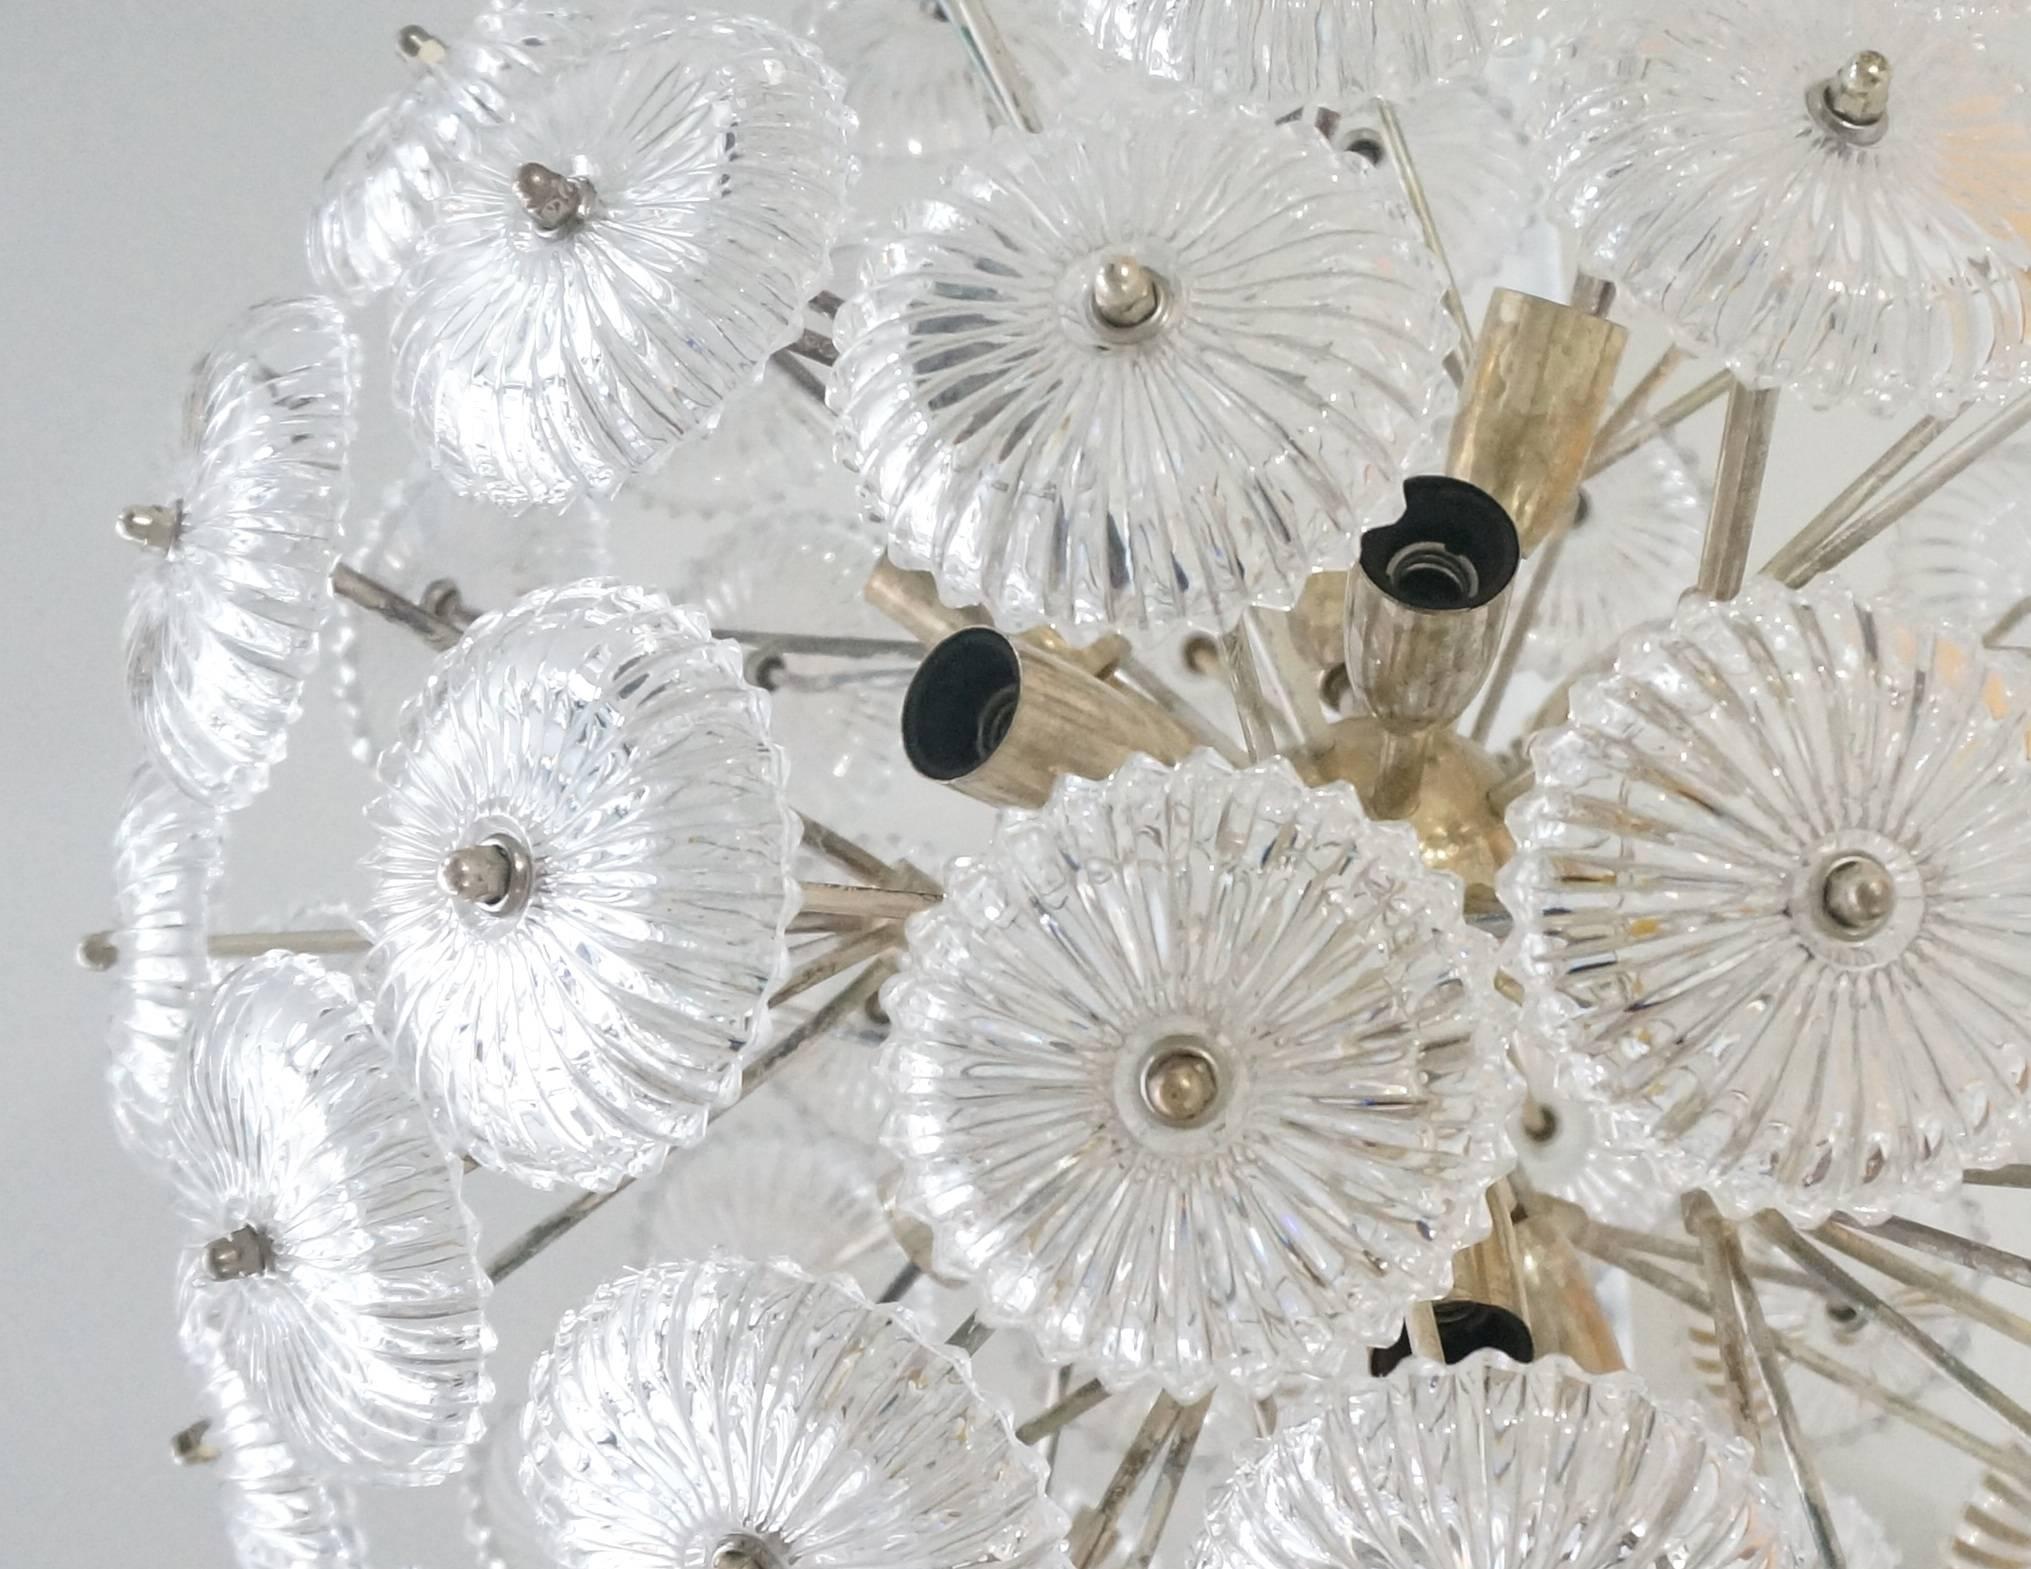 This amazing chandelier was acquired from the Hotel Deutscher Hof which is located in Germany. The piece is known as the 